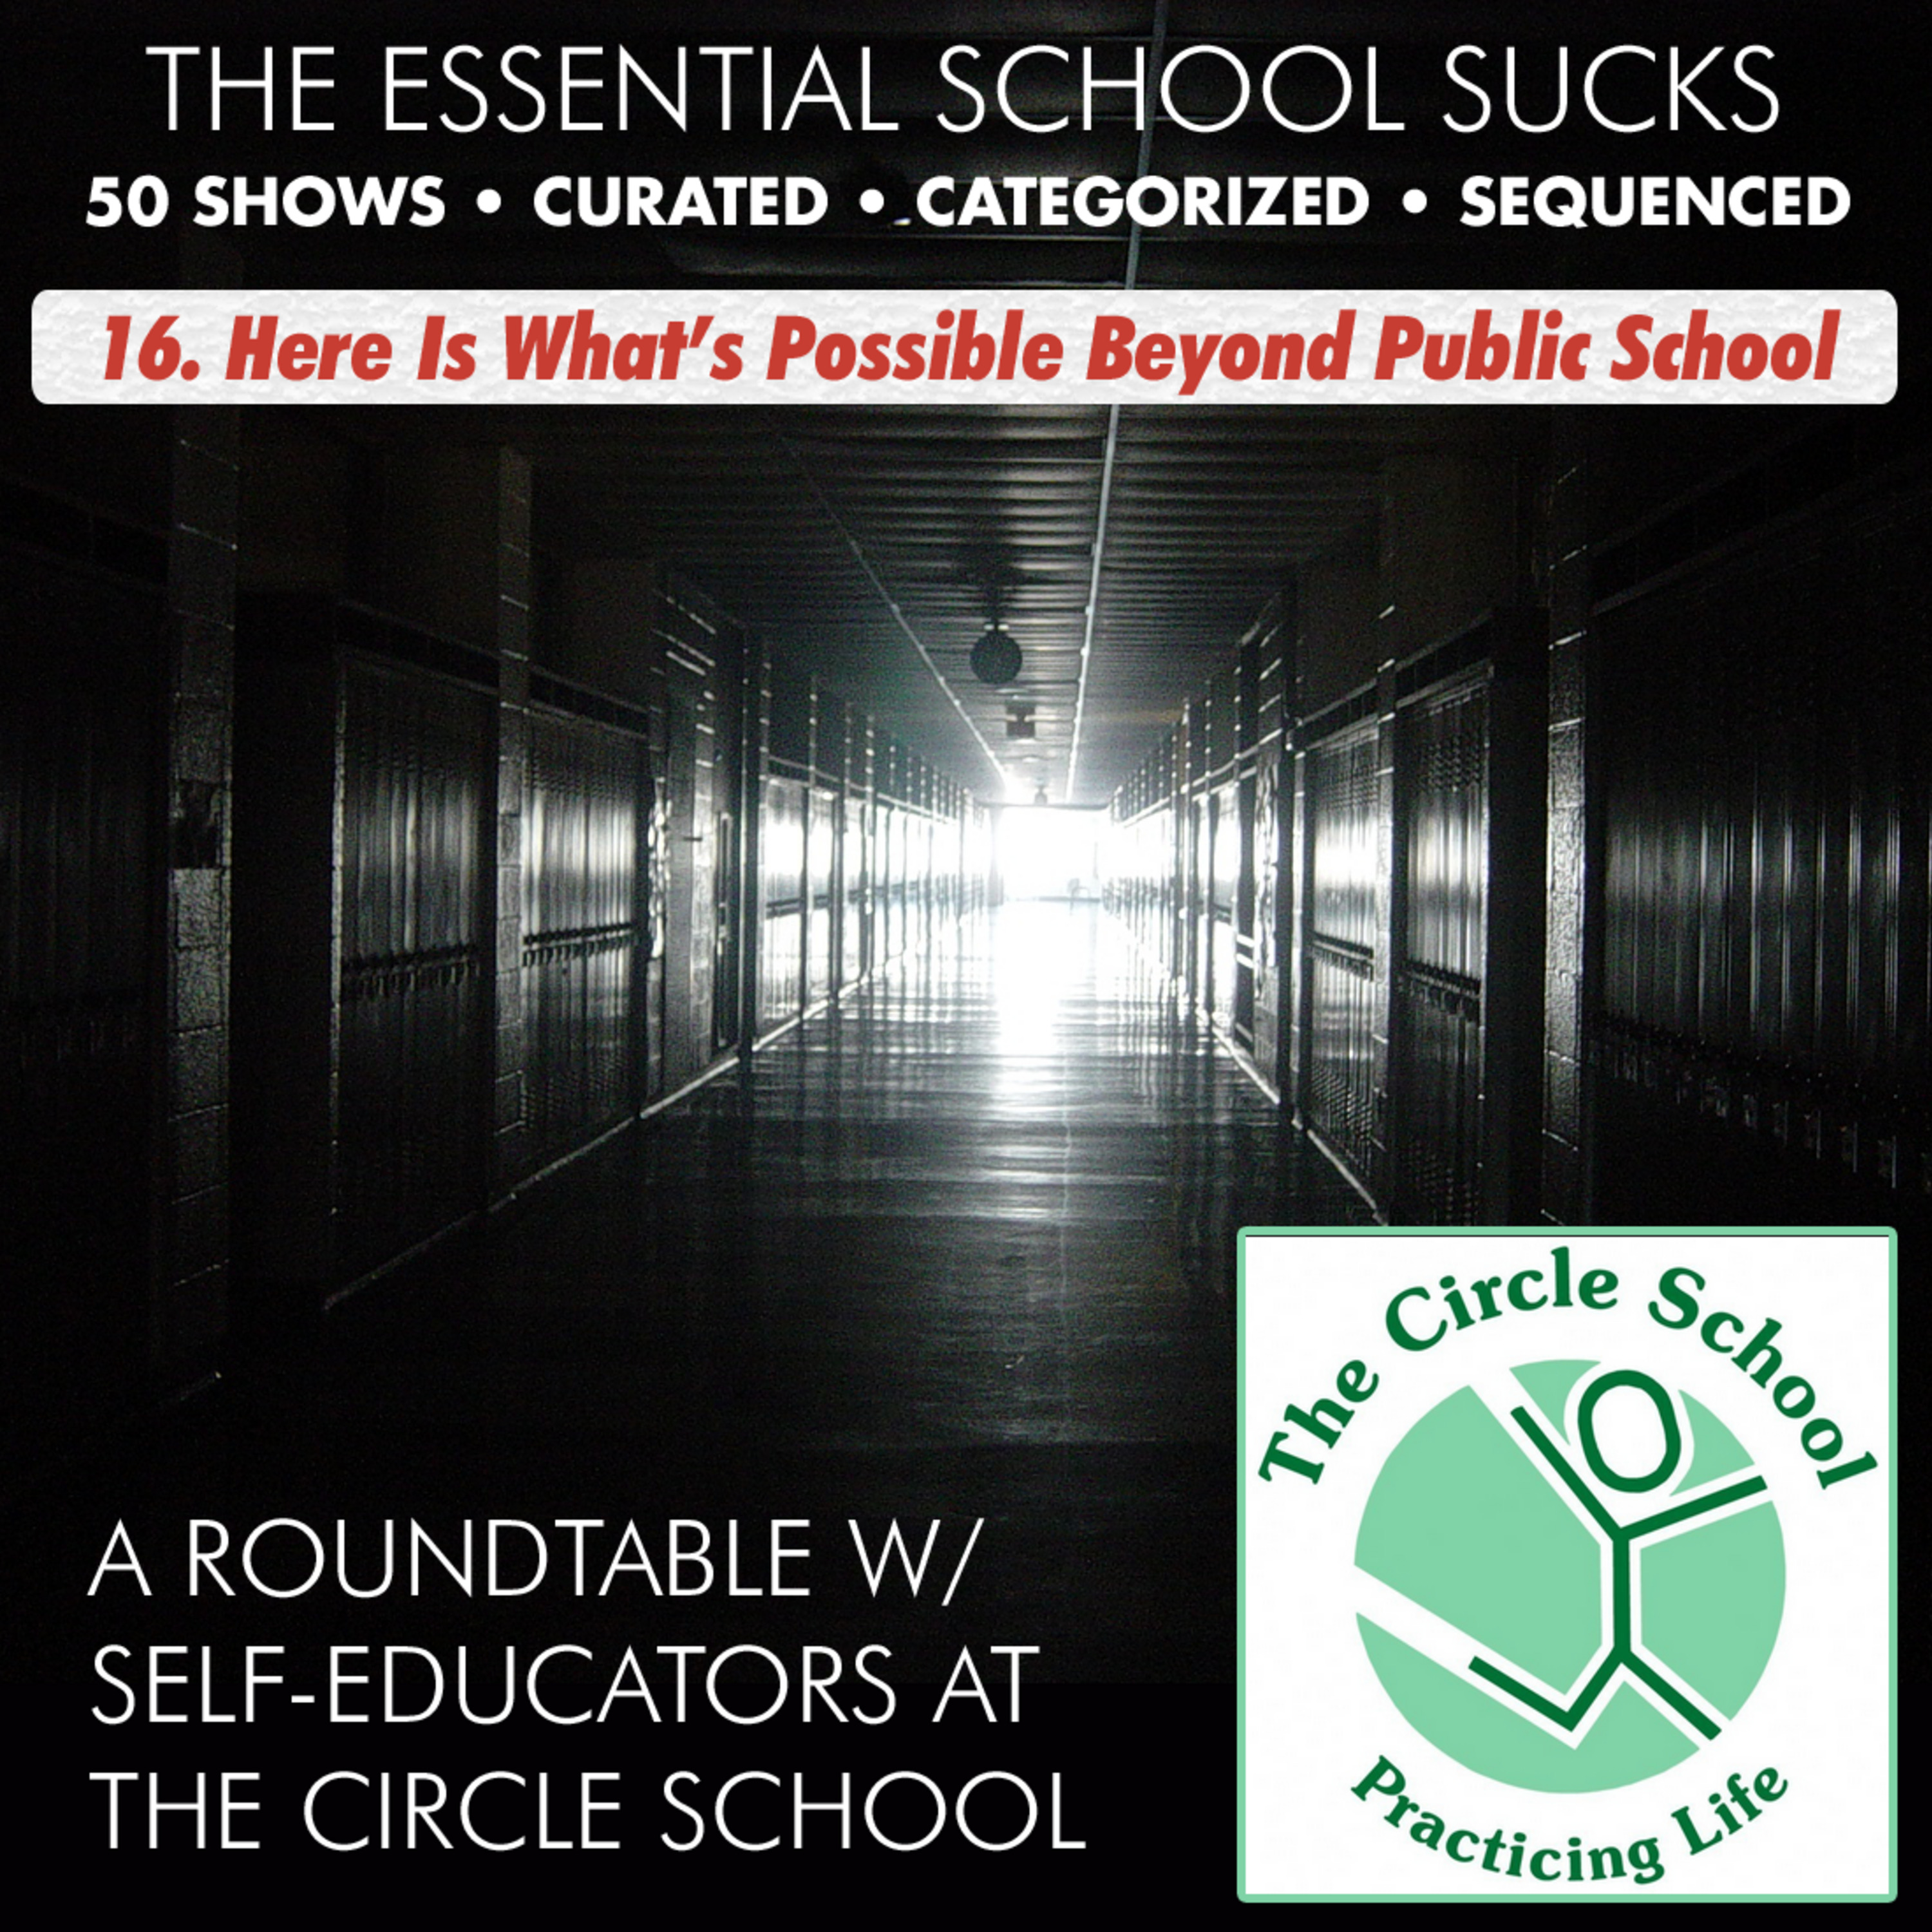 16. Here Is What's Possible Beyond Public School